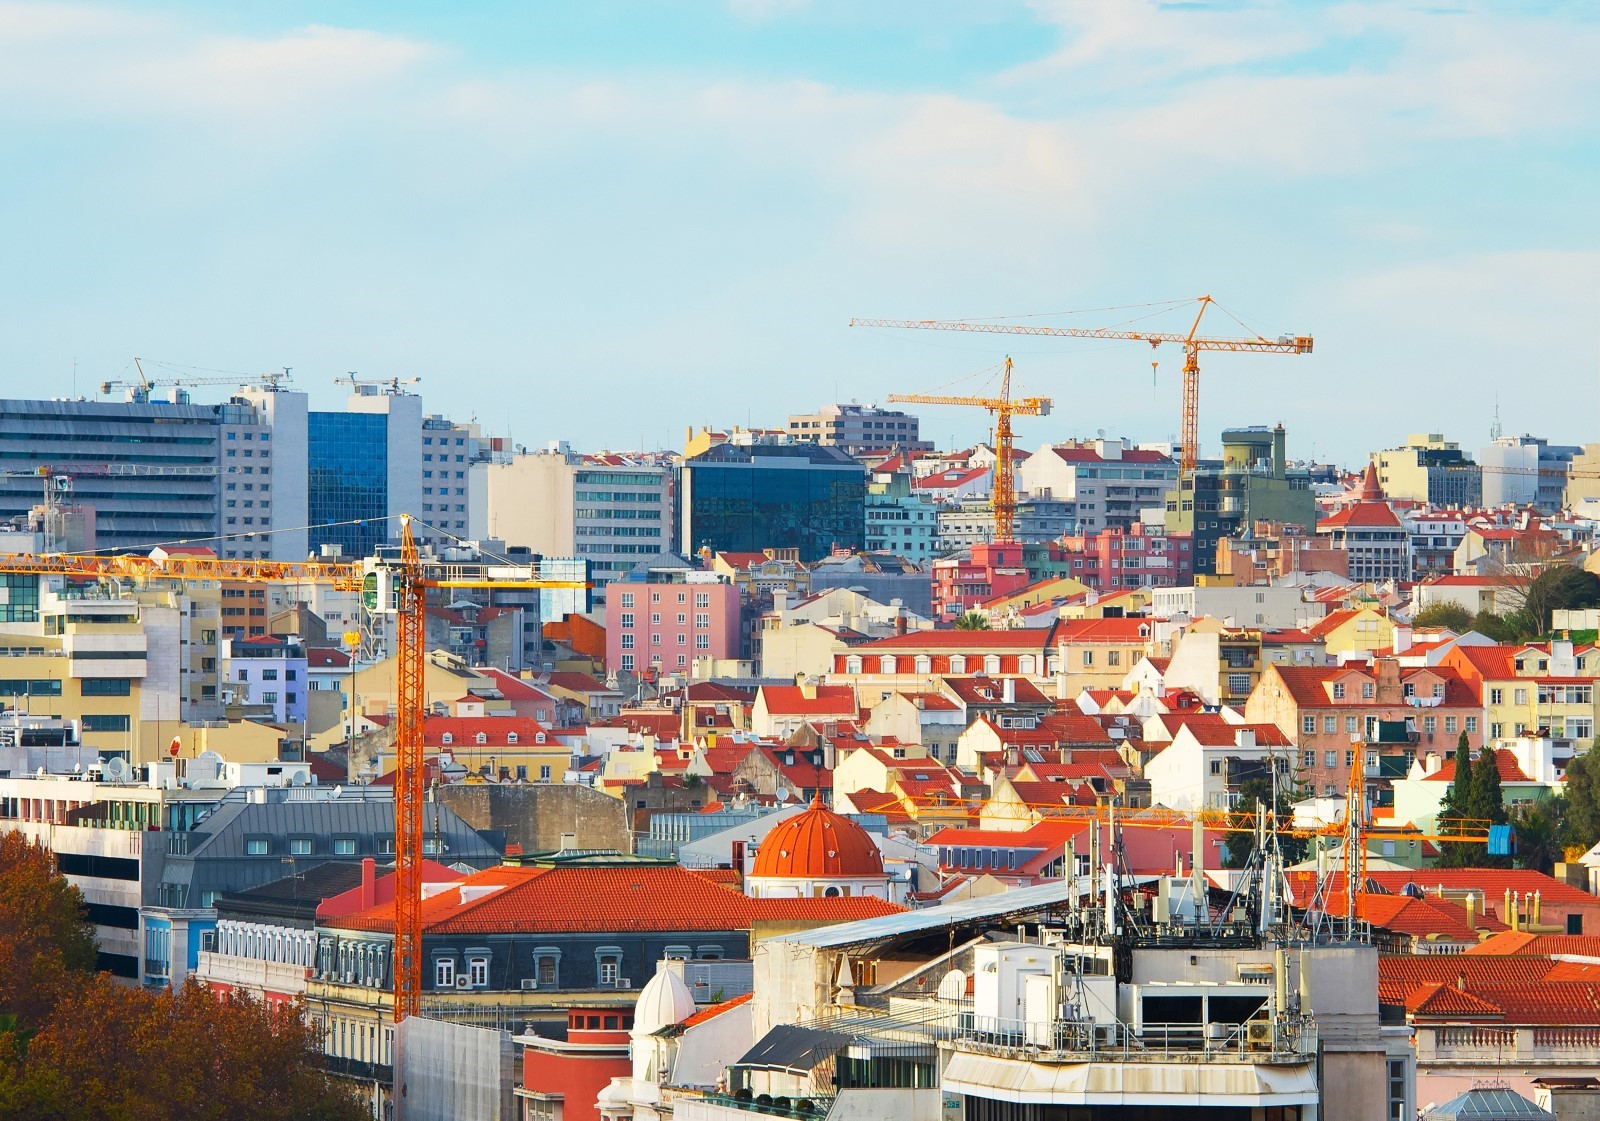 Portuguese Real Estate market has been on the rise and bringing profits to investors.